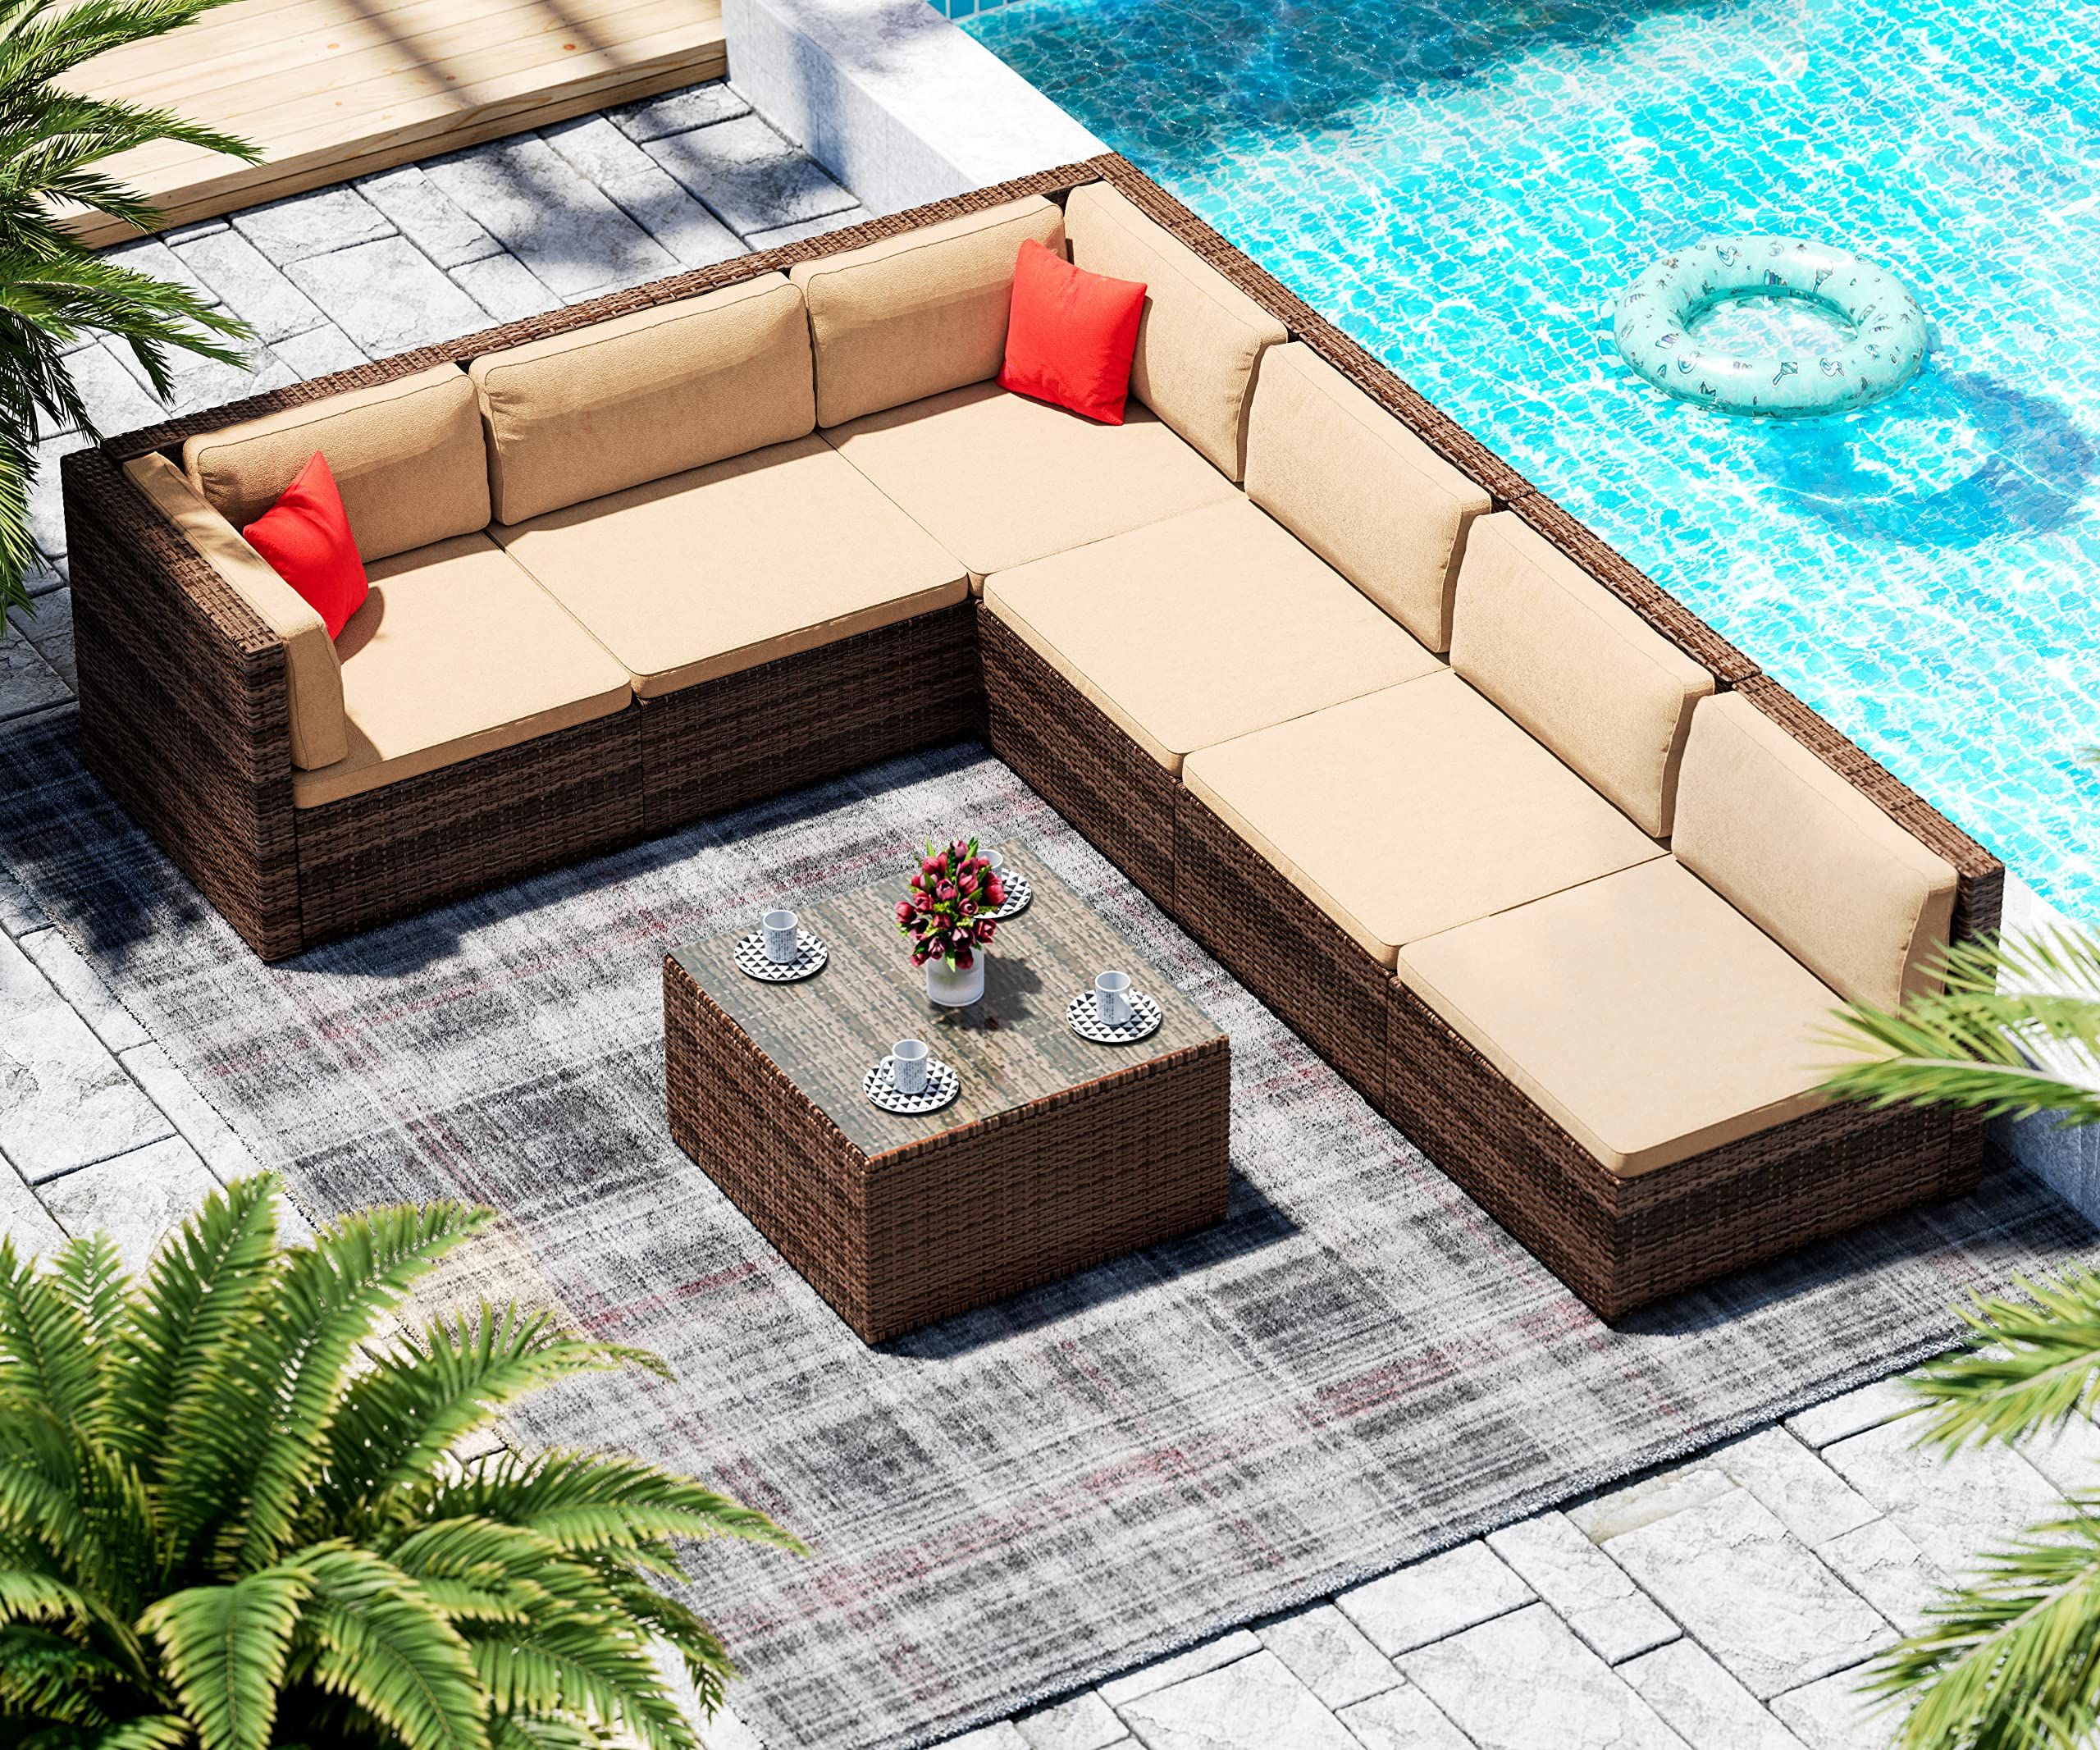 Amazon: Lhbcraft 7 Piece Patio Furniture Set, Outdoor Furniture Patio Sectional  Sofa, All Weather Pe Rattan Outdoor Sectional With Cushion And Glass Table,  Clips, Beige (ot004 Brown Beige) : Patio, Lawn & Garden With Regard To Newest 7 Piece Rattan Sectional Sofa Set (View 4 of 15)